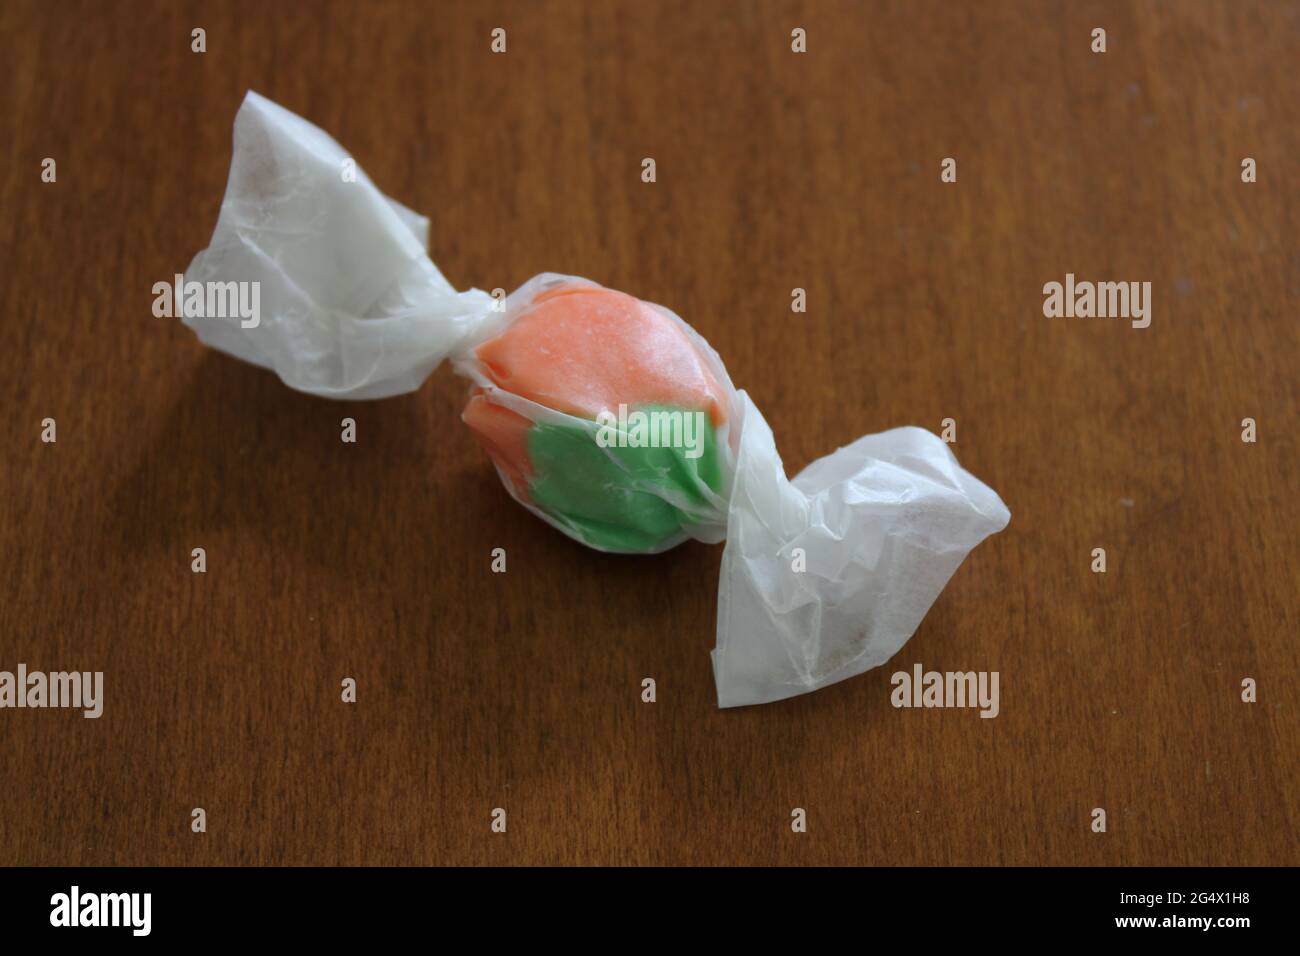 A Single Piece of Orange Flavor Old-Fashioned Saltwater Taffy Wrapped in Wax Paper Stock Photo